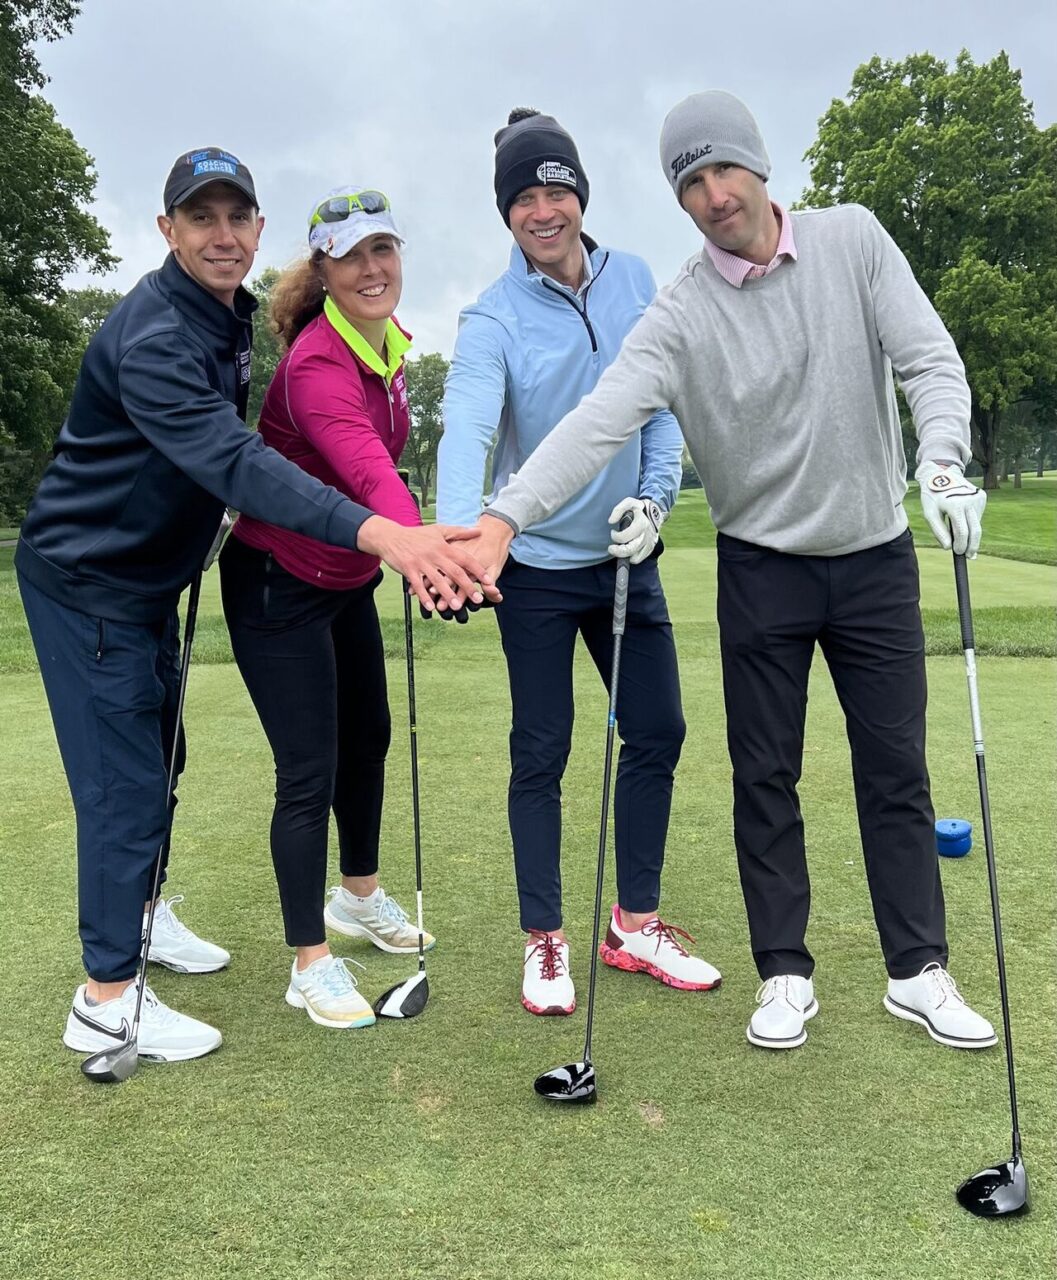 Karen Knudsen: All in against cancer with my friends from ⁦Coaches vs. Cancer